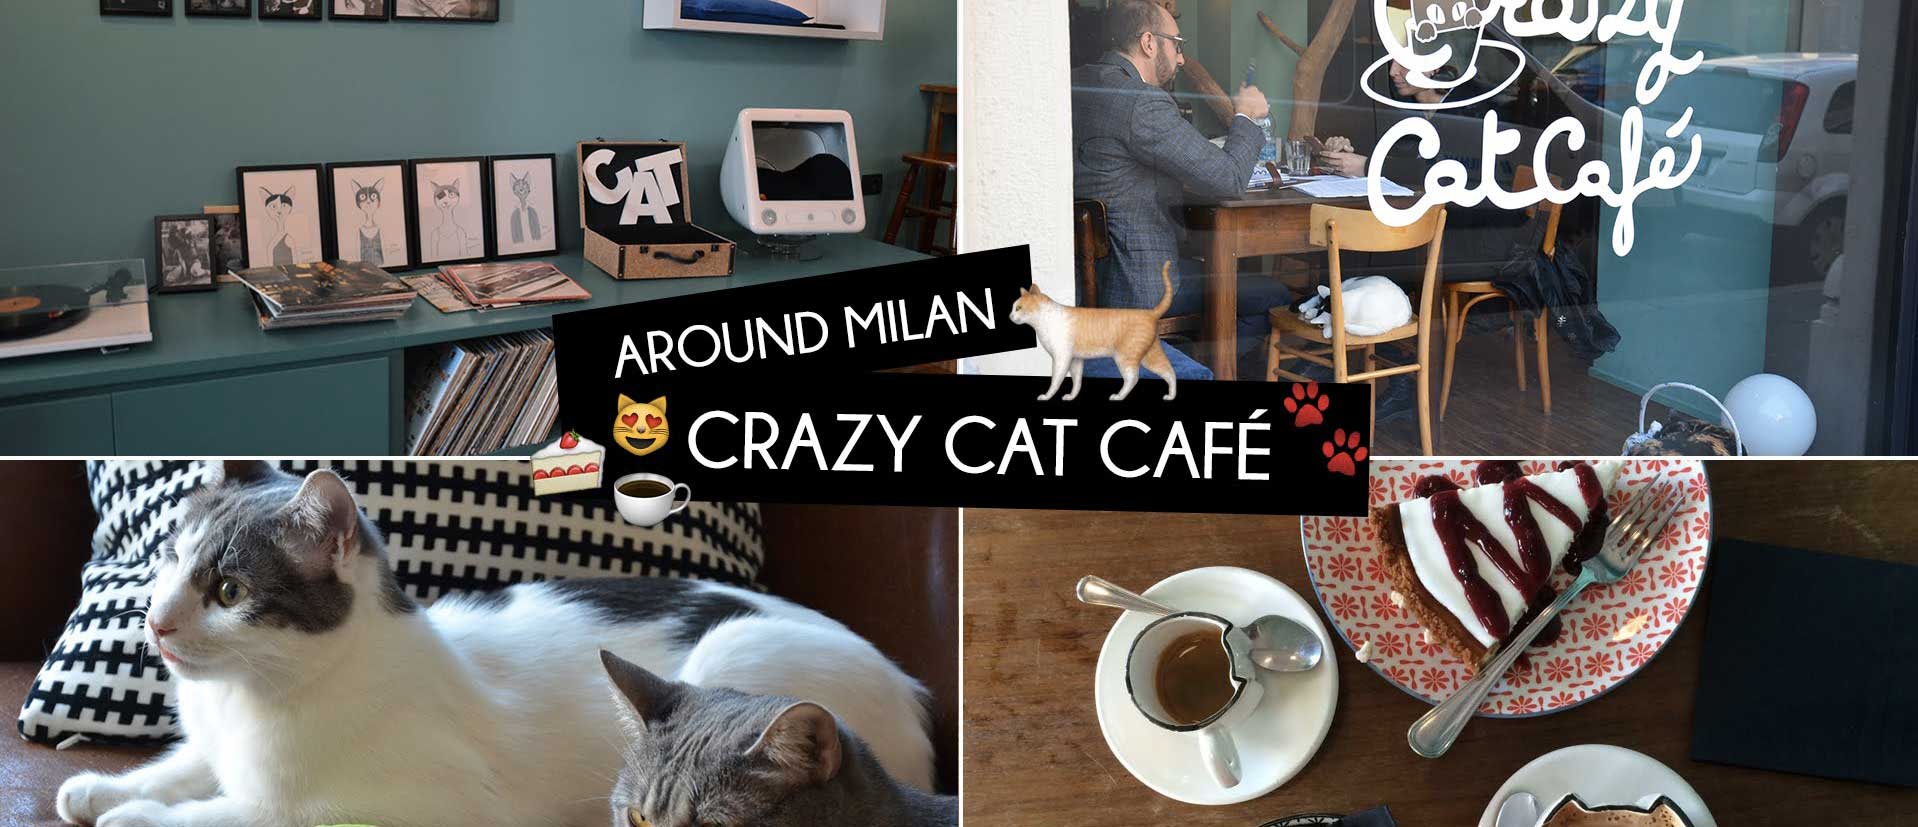 An unusual experience: visit the Crazy Cat Cafe near our hotel in Milan!